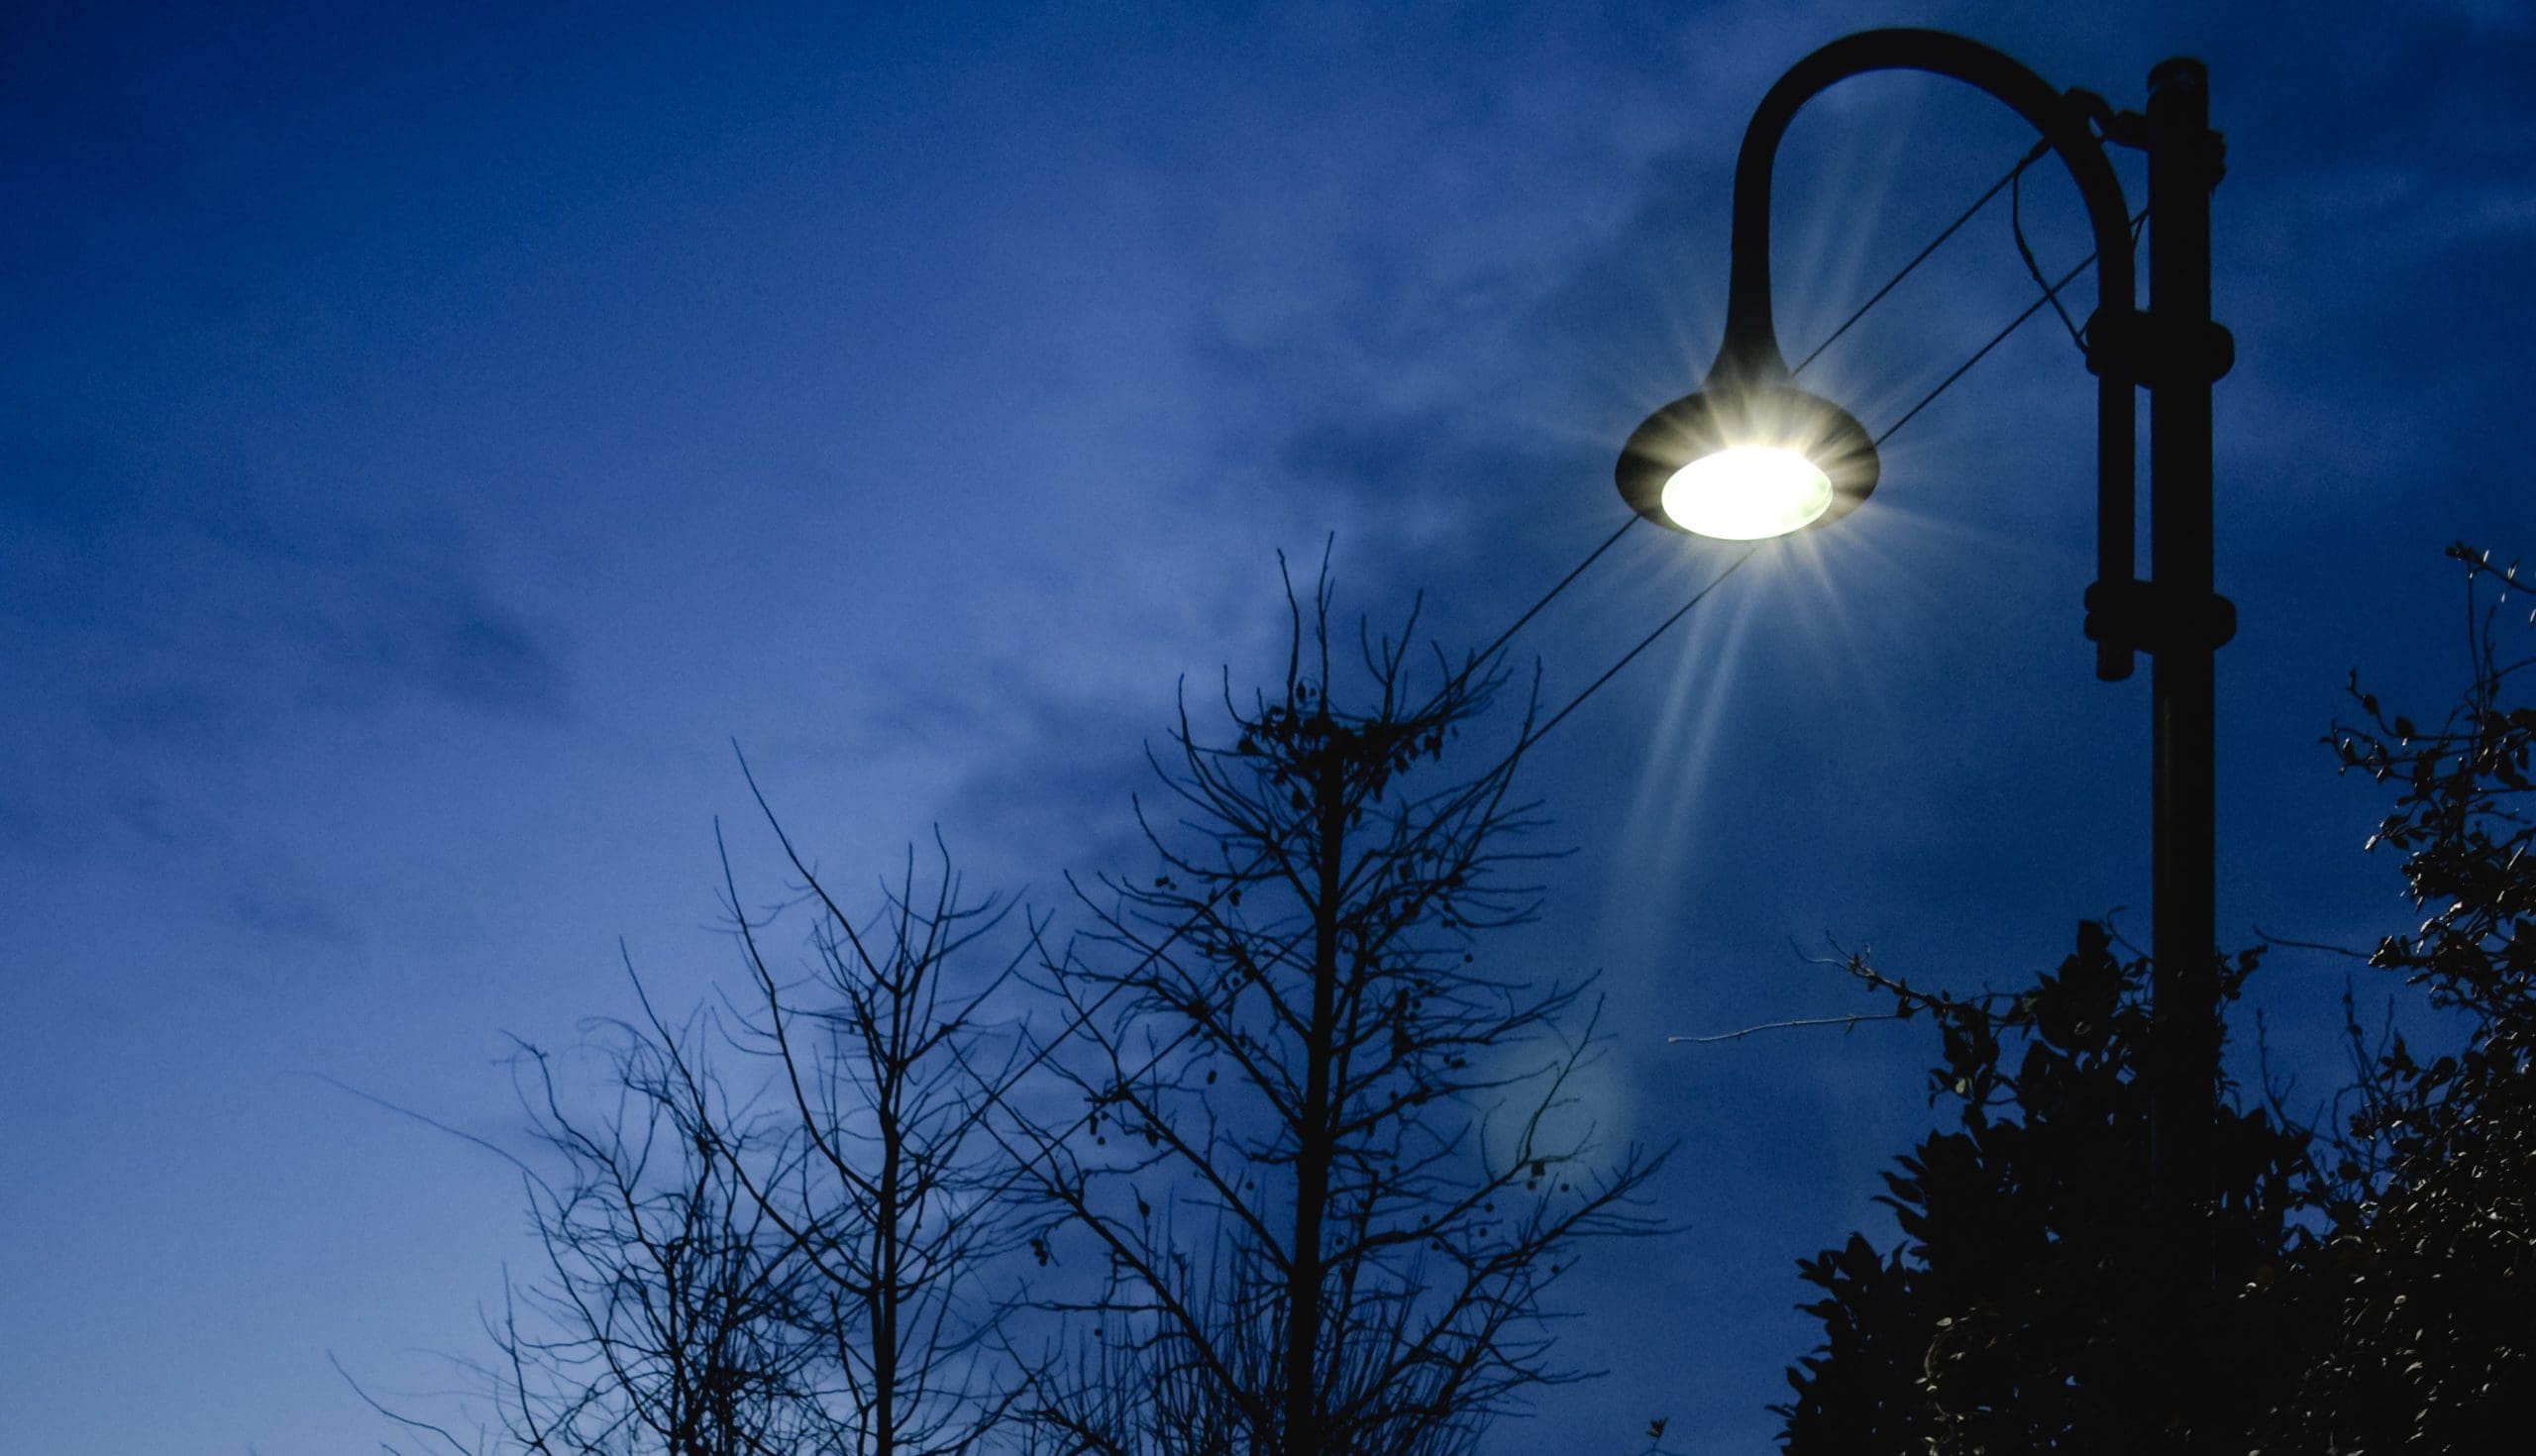 Can We Fight Light Pollution and Provide Street Lighting? Absolutely -